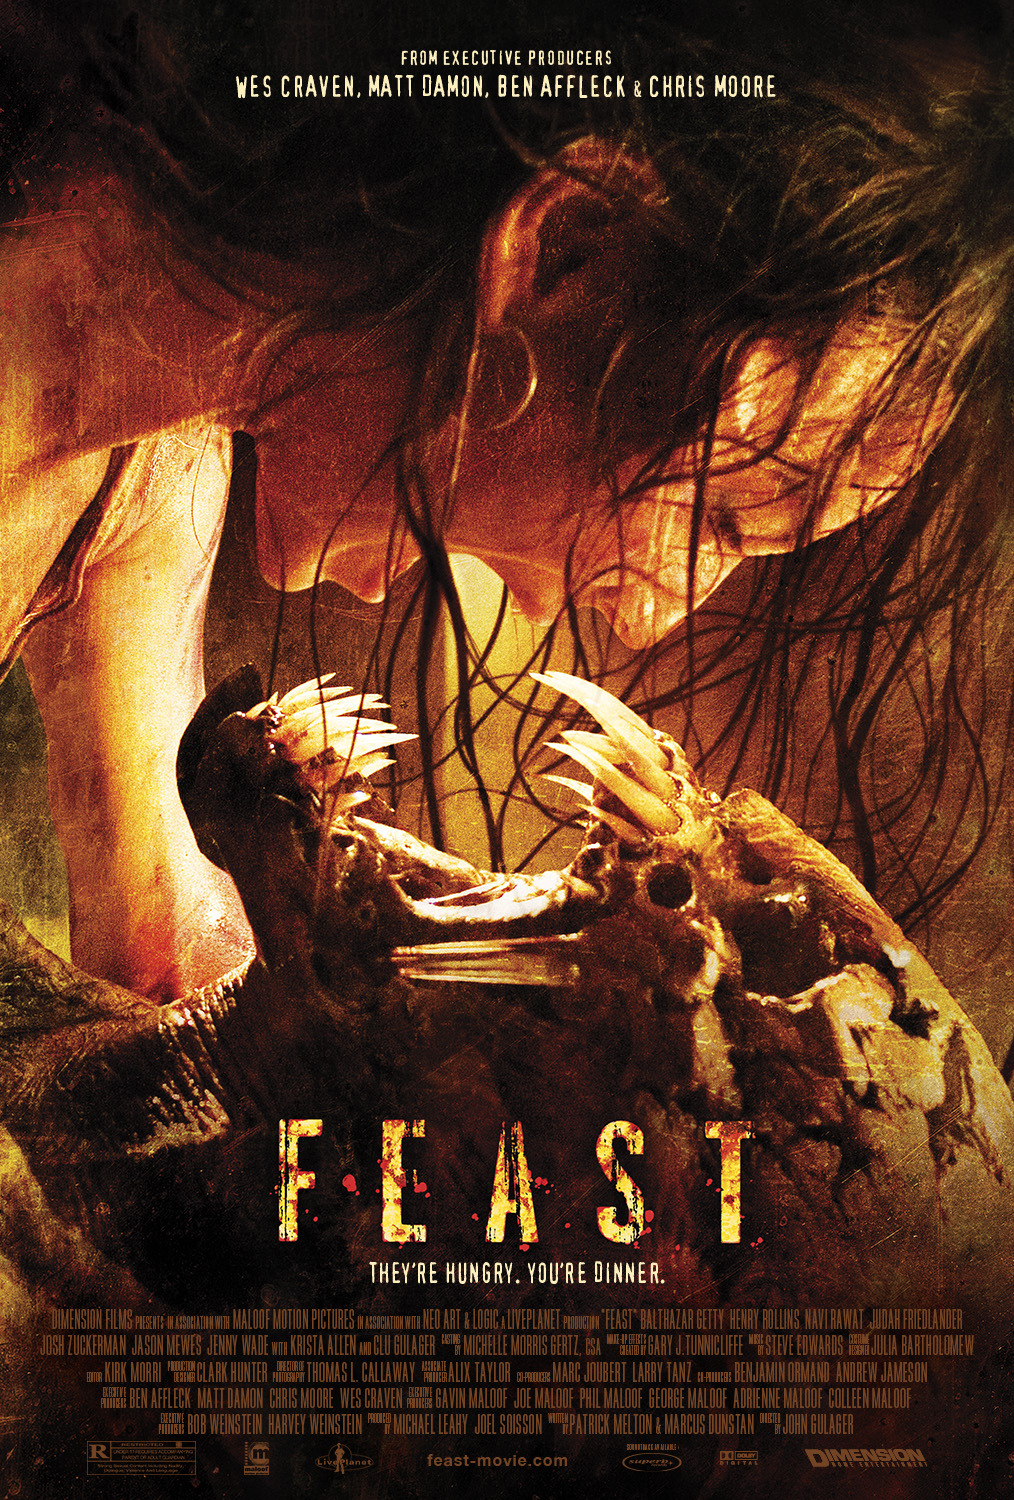 Extra Large Movie Poster Image for Feast 